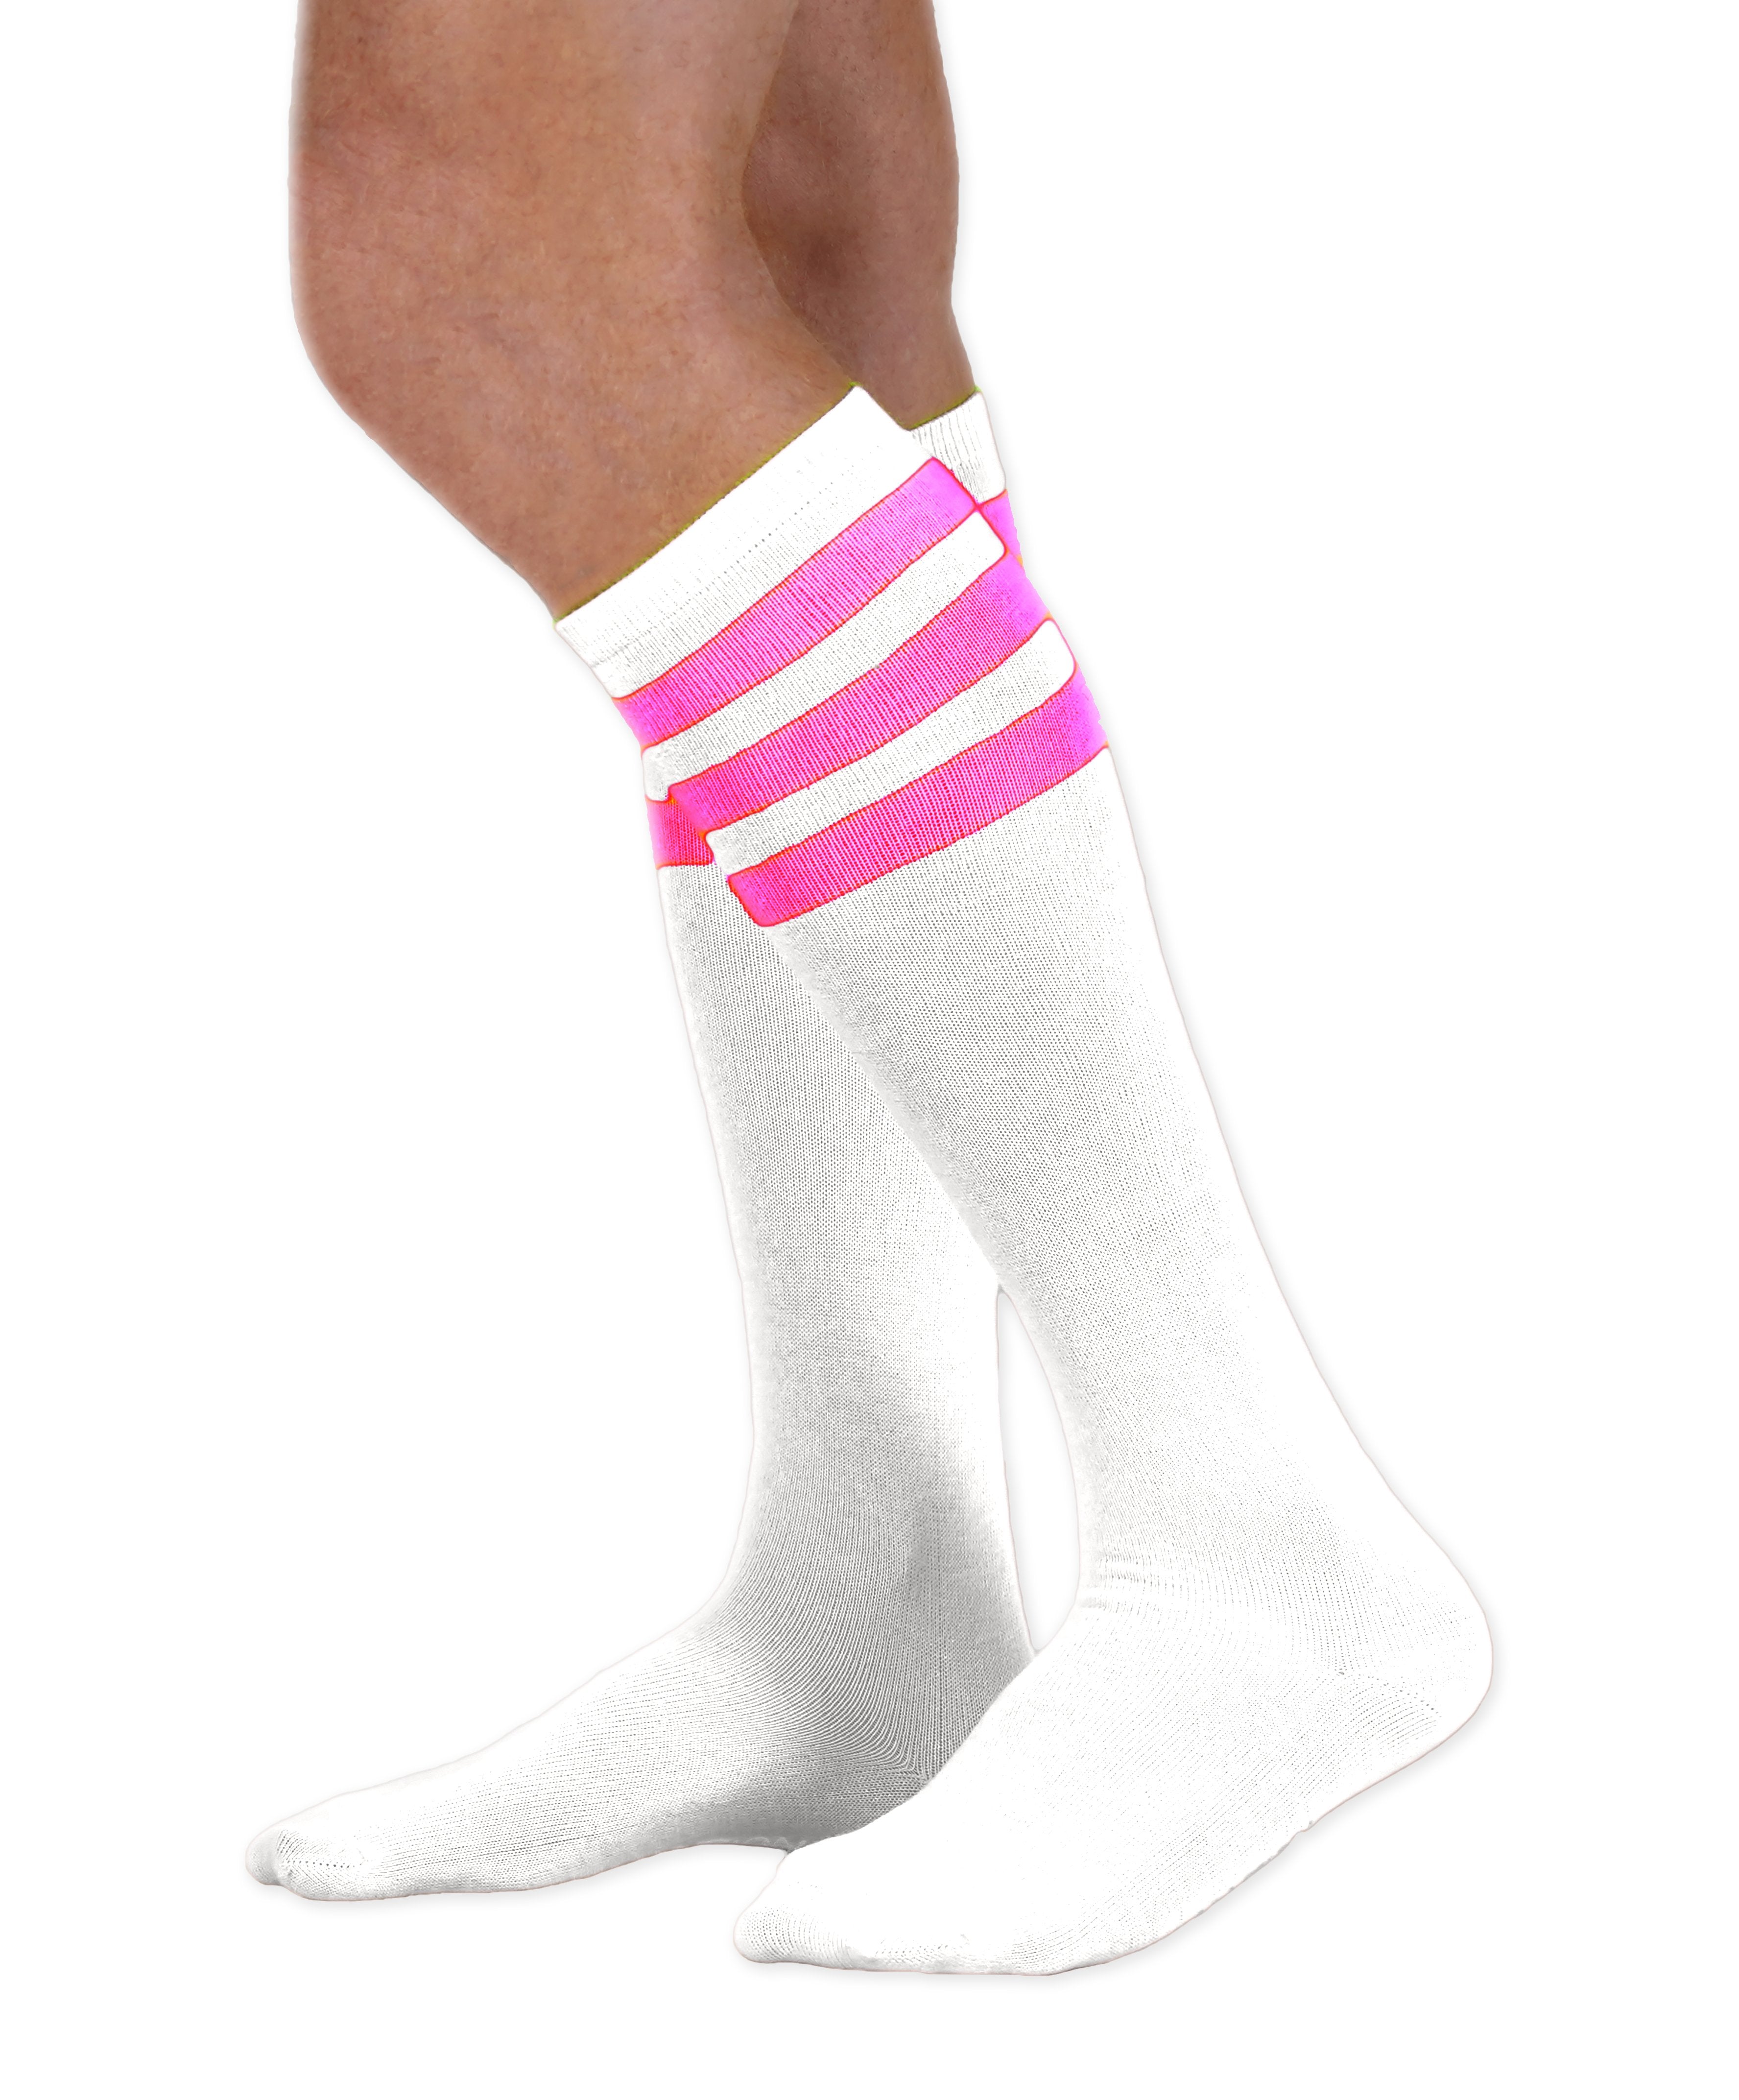 Unisex adult size white knee high tube sock with three fluorescent neon pink stripes